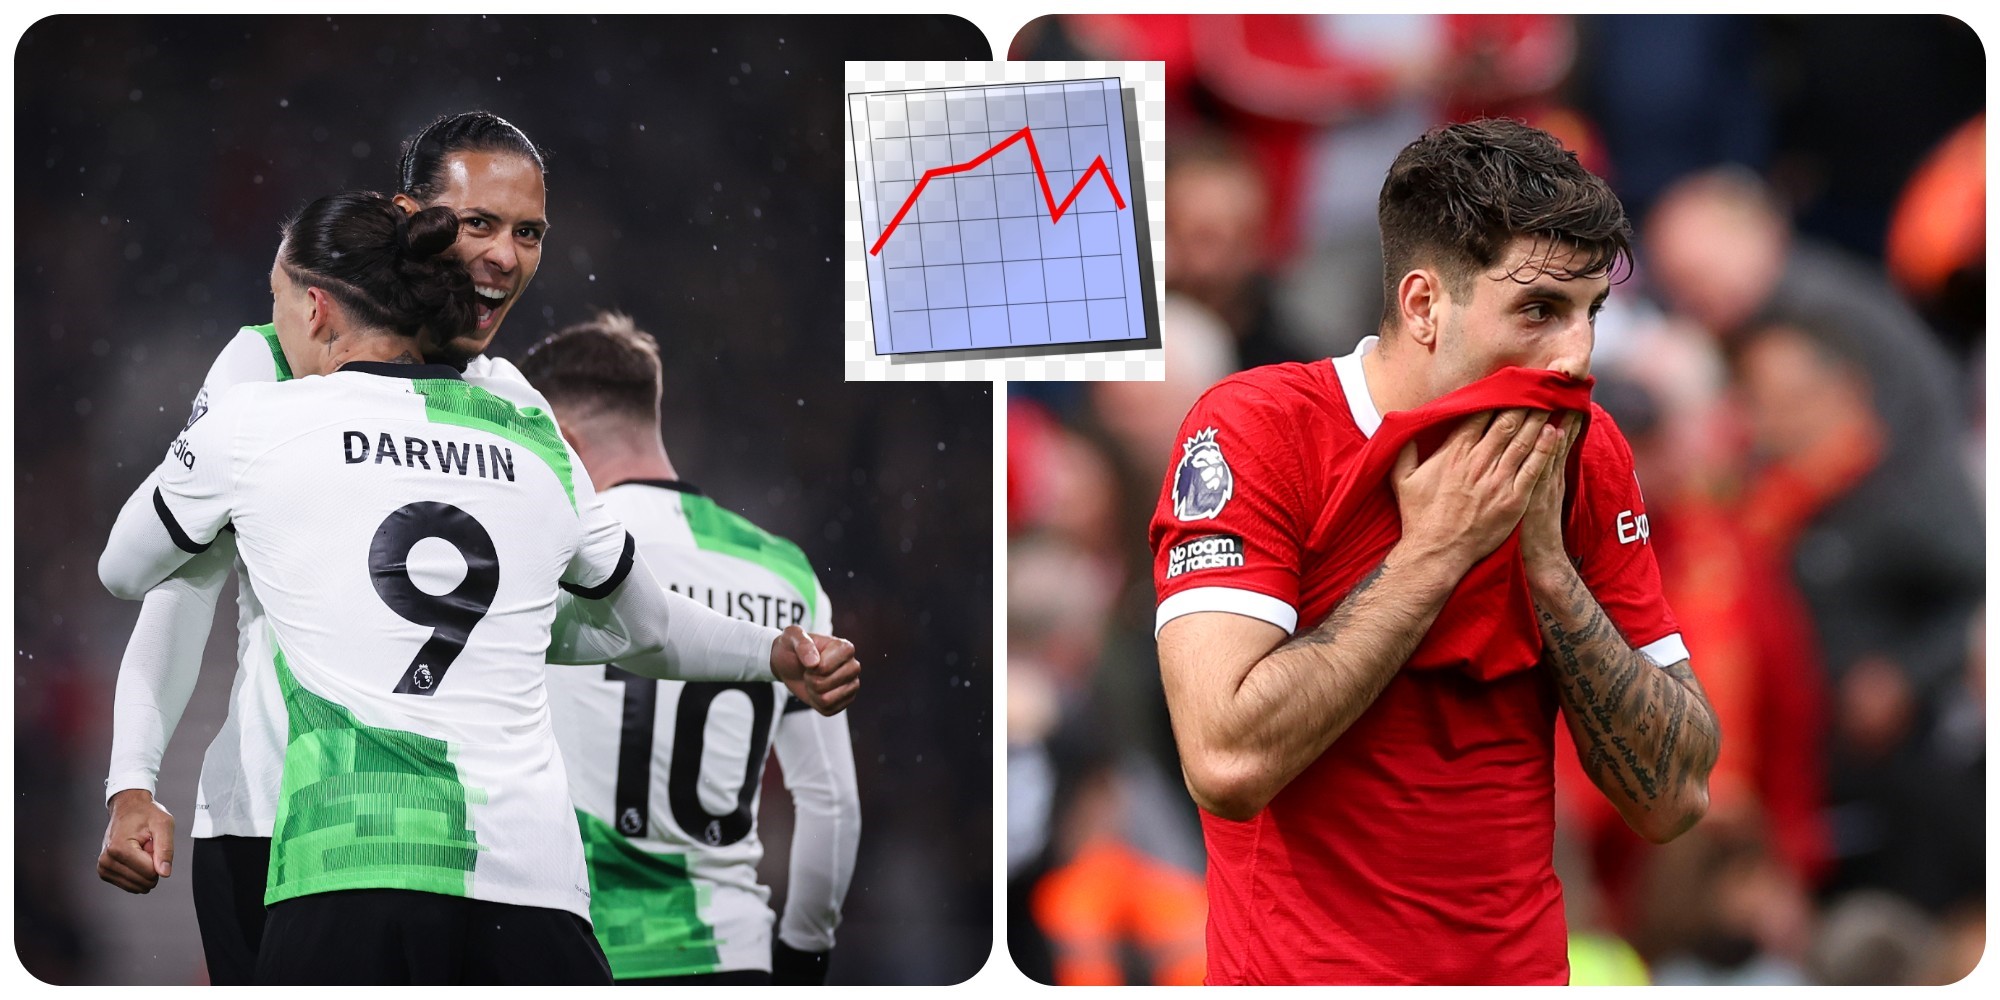 Analysis: Exploring the numbers and trends behind Liverpool’s shot conversion and xG this season